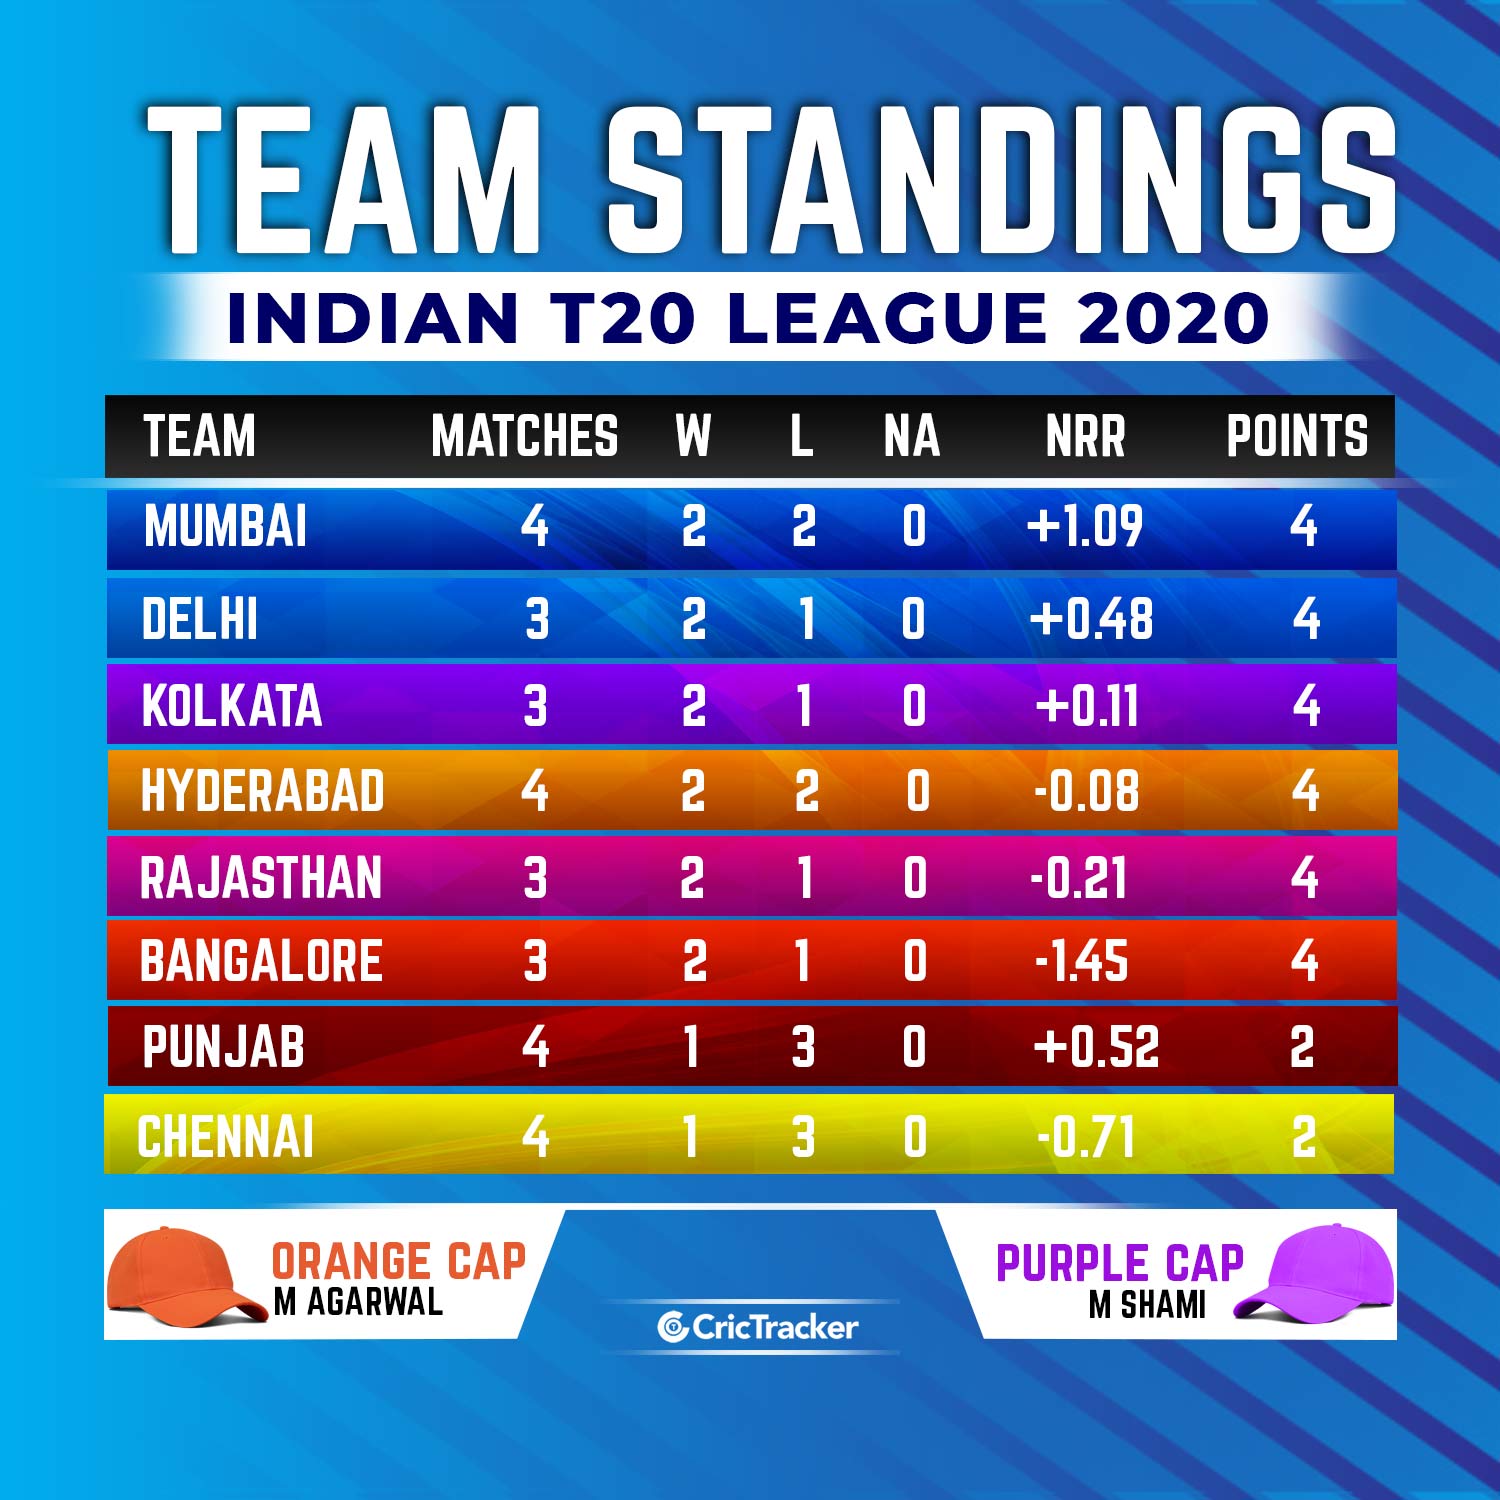 Latest IPL 2020 points table, Orange and purple cap holders after CSK